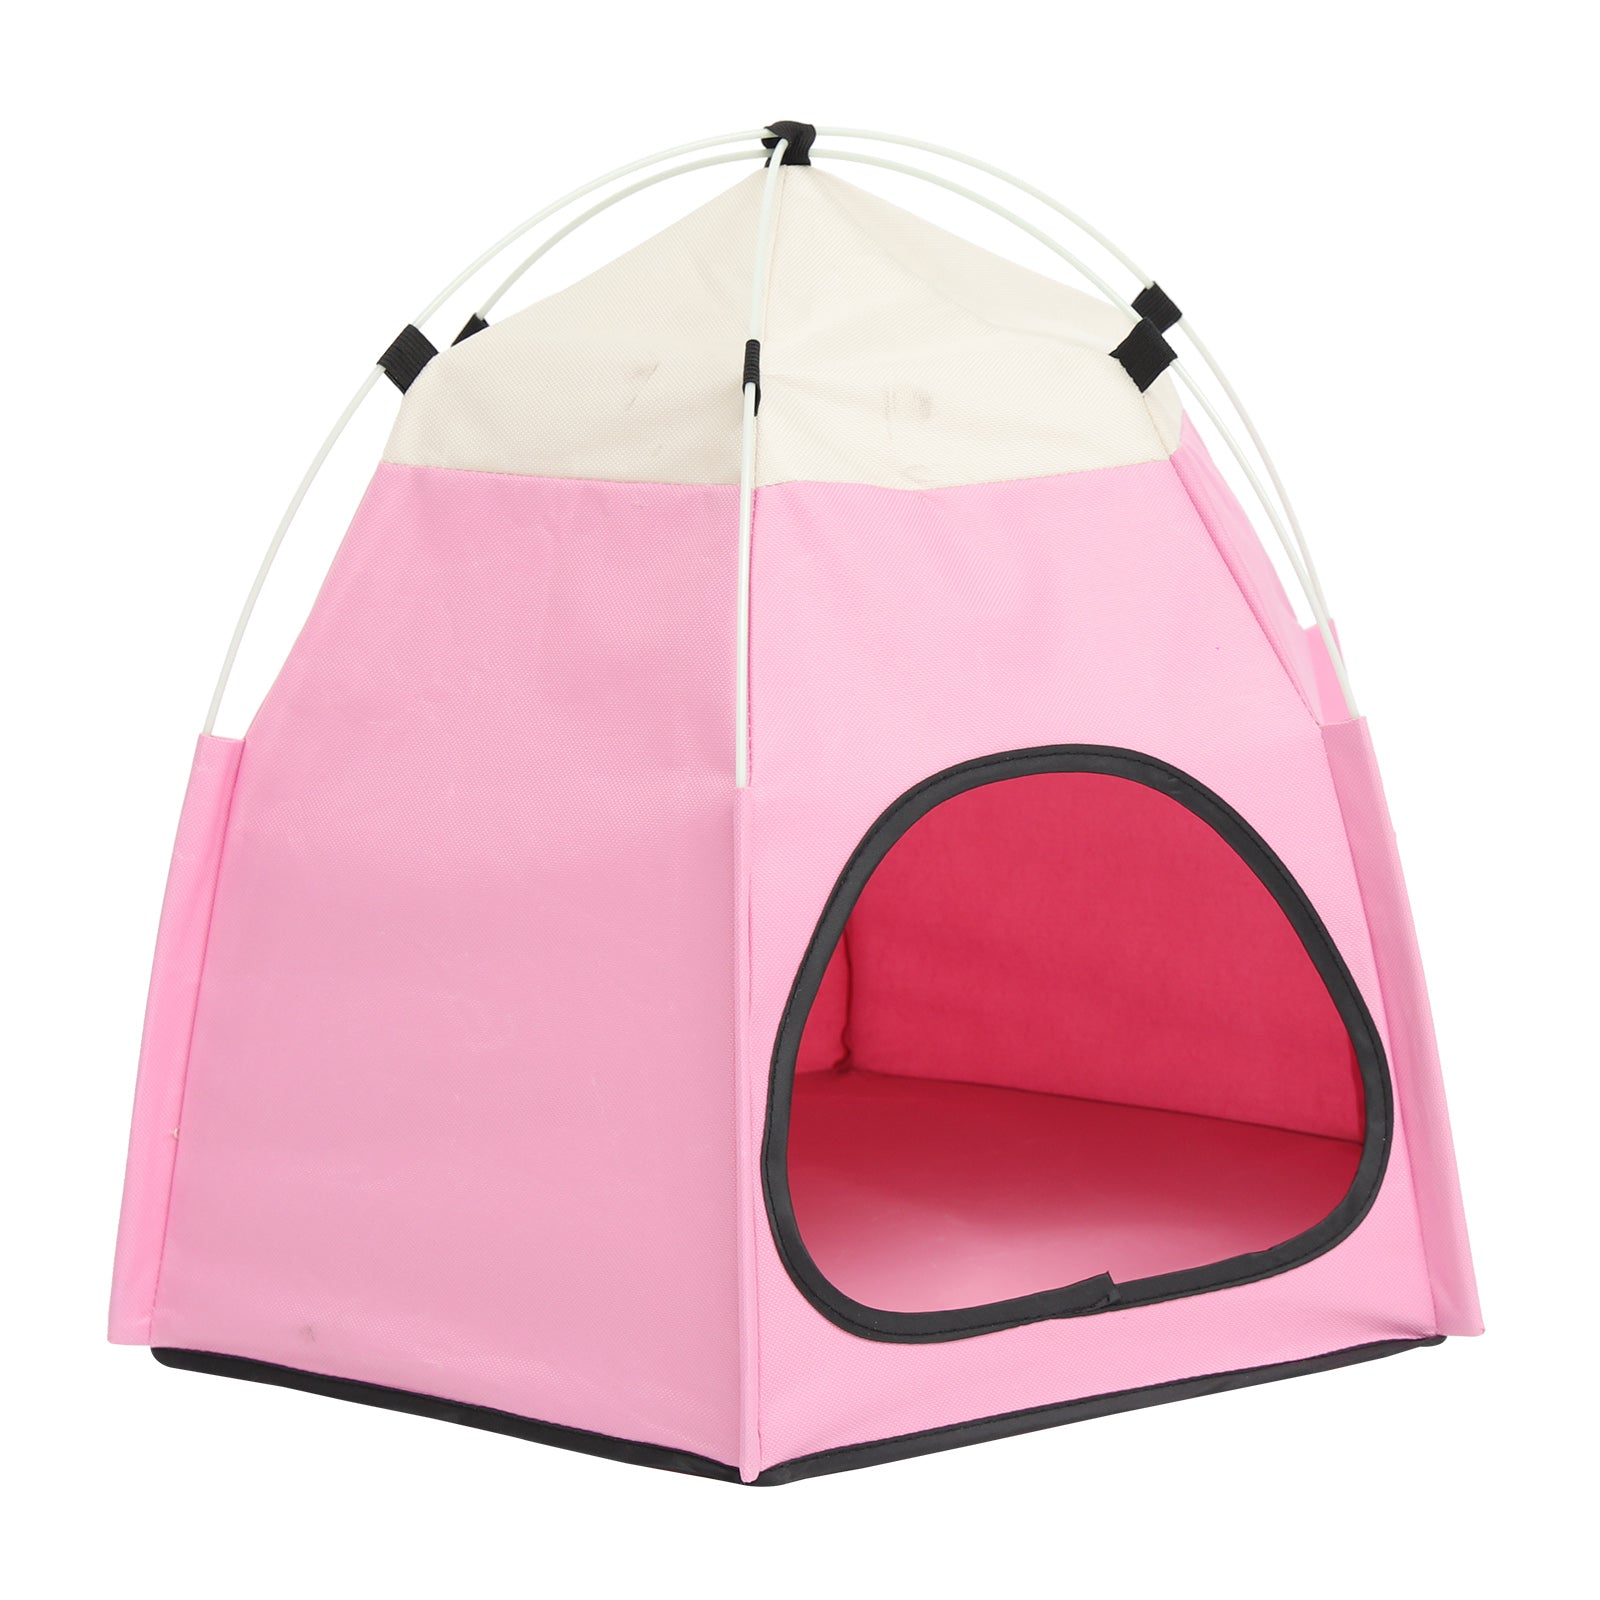 Tent Pet Dog Cat House Sleeping Bed TentIndoor Kittendecorative Adorable Household Comfortable Play Napping Foldable